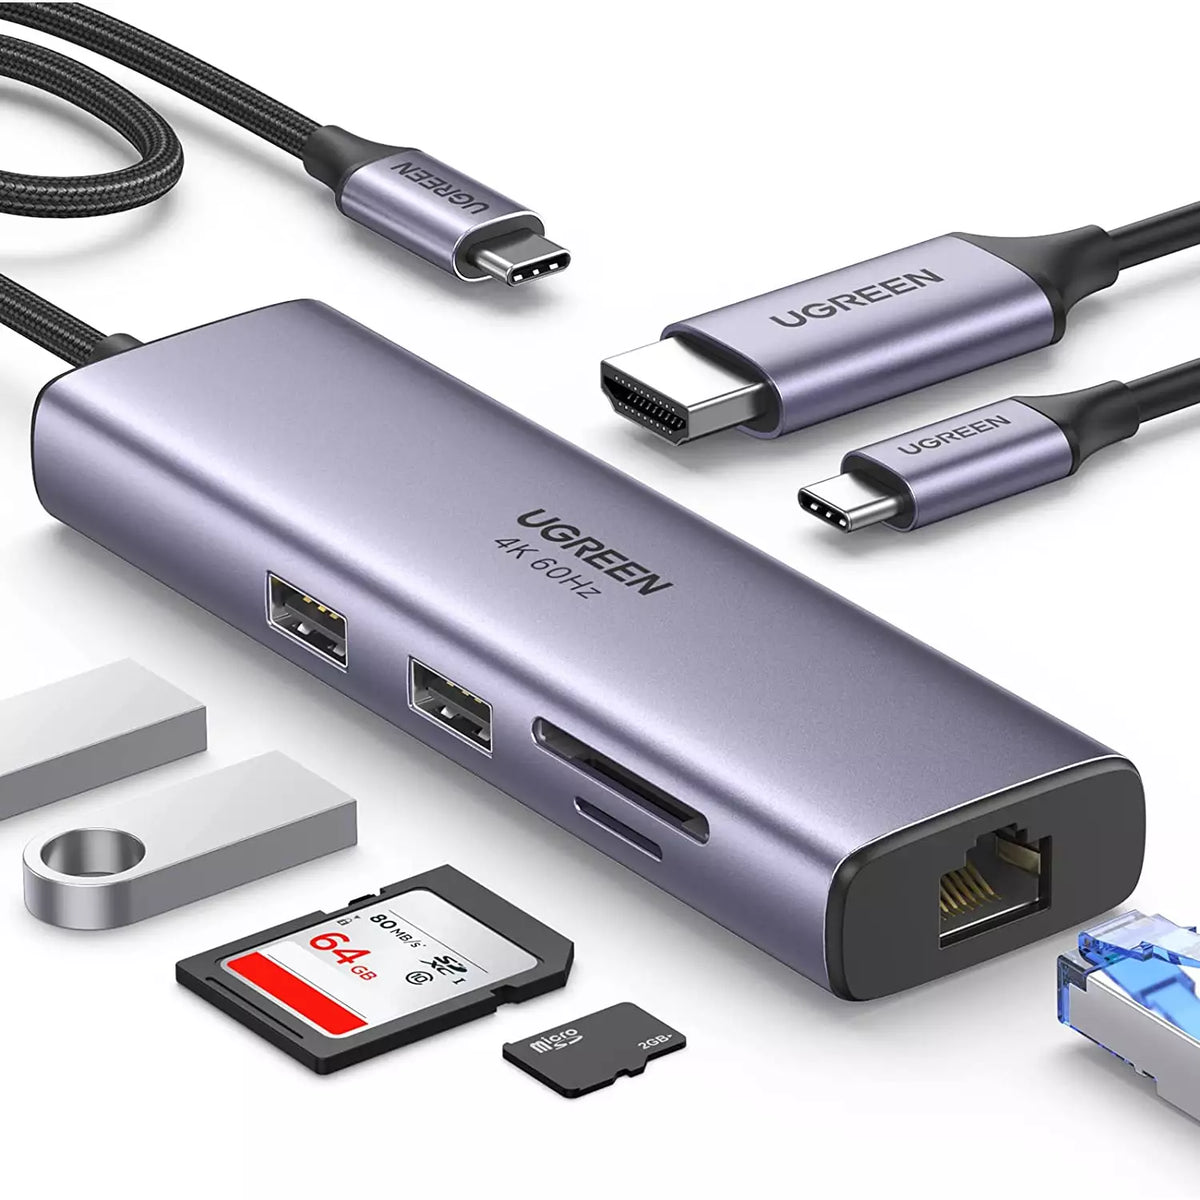 UGREEN 60515 USB C Hub with Ethernet 7 in 1 Multiport Adapter